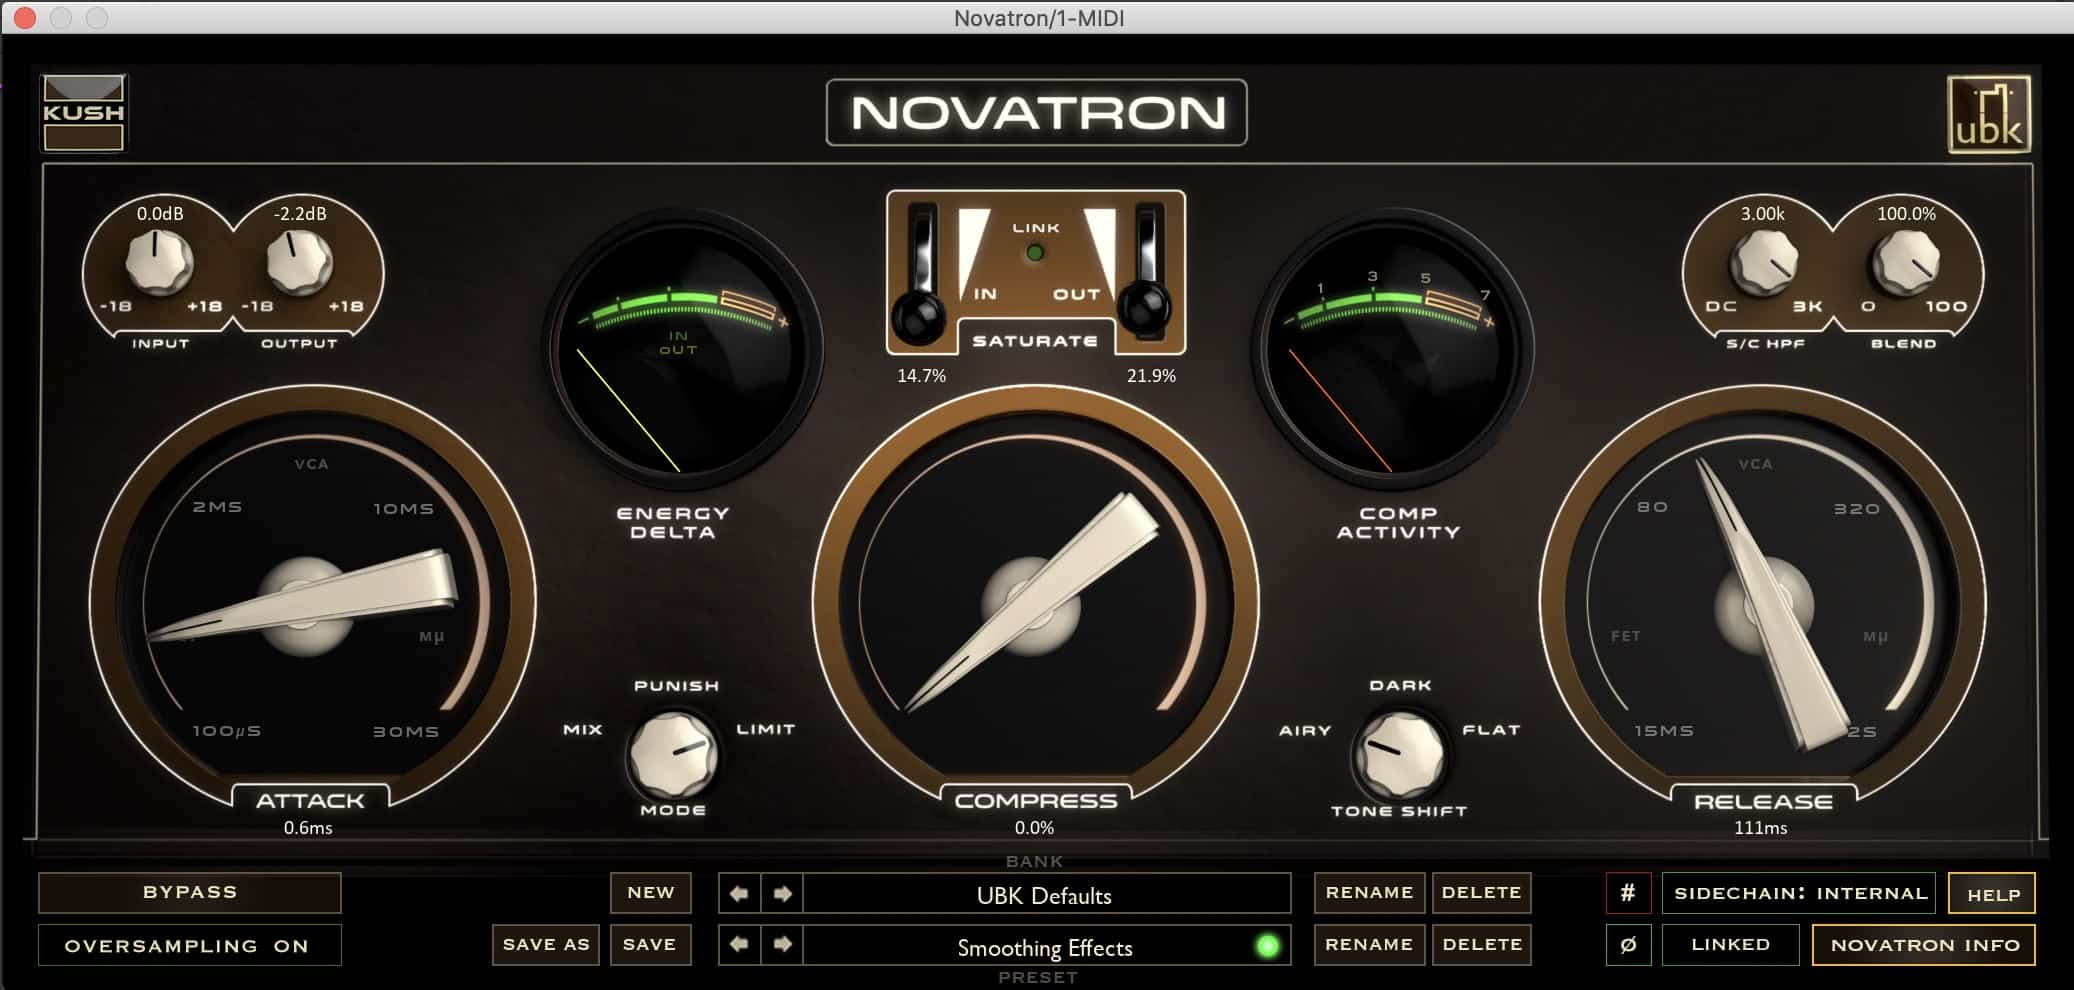 Novatron VERSION 1.0.11 is HERE – Sweetest, Lush and Classic Vibe Compressor by The House of Kush